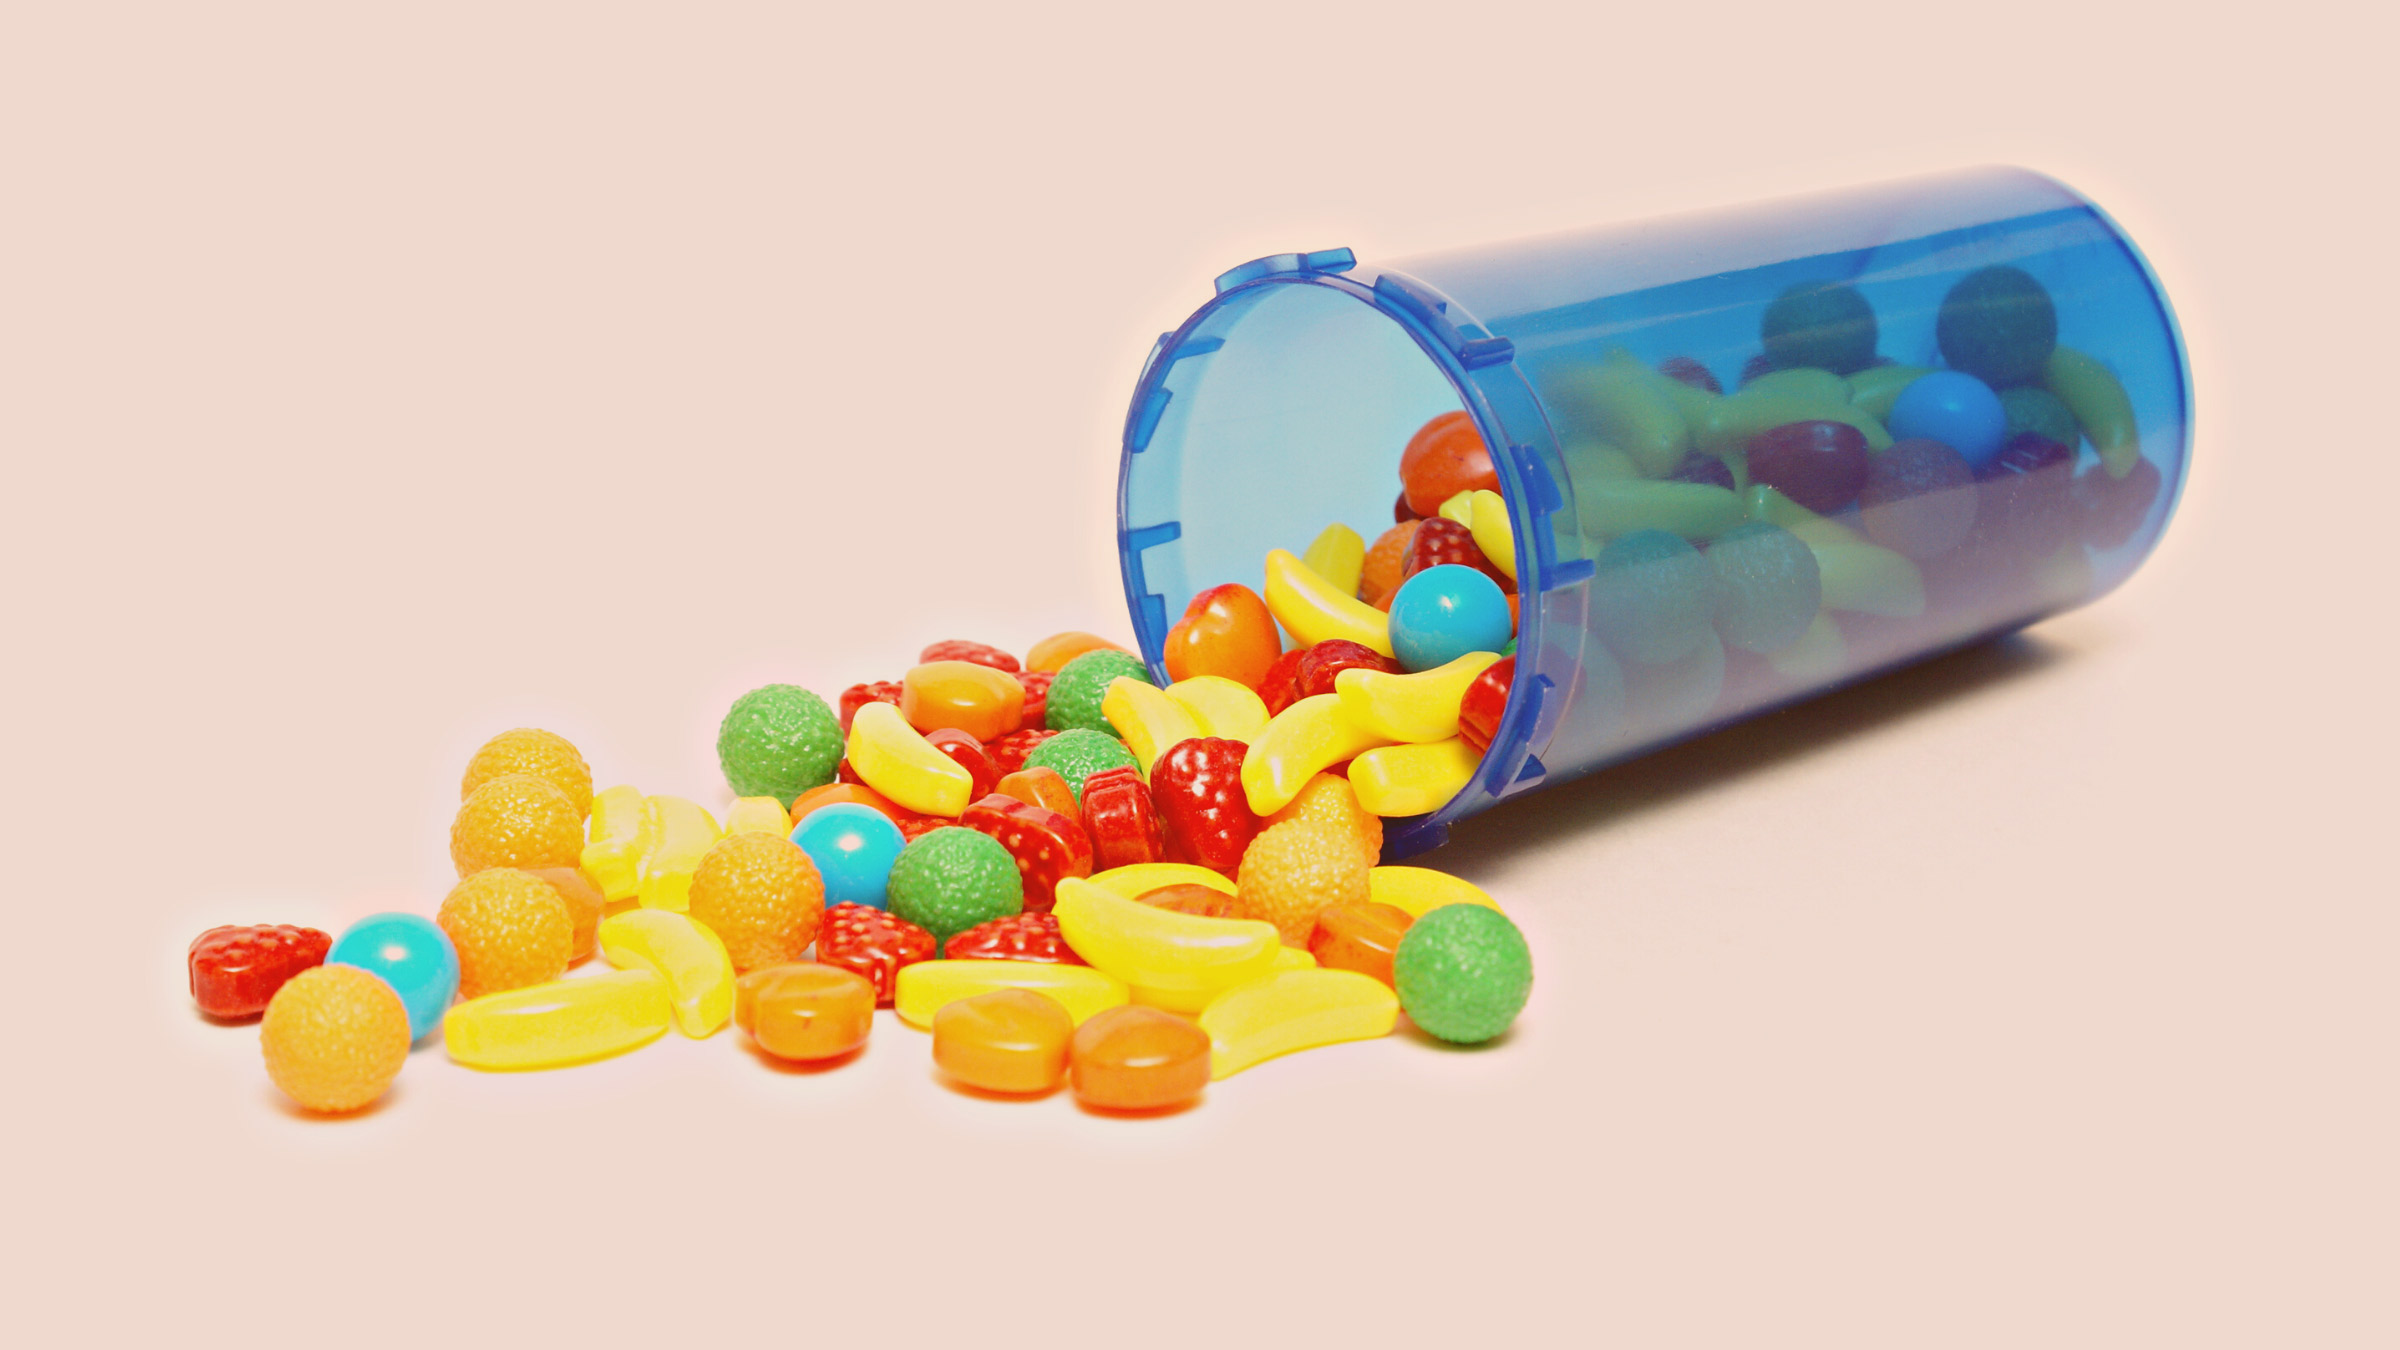 https://images.ctfassets.net/4f3rgqwzdznj/4CETtMLwKCZi9pG23kqCAG/7f3561e8383c58fed41f6ea6aa0fbc97/colorful-candy-spilling-out-of-pill-bottle-524921545.jpg